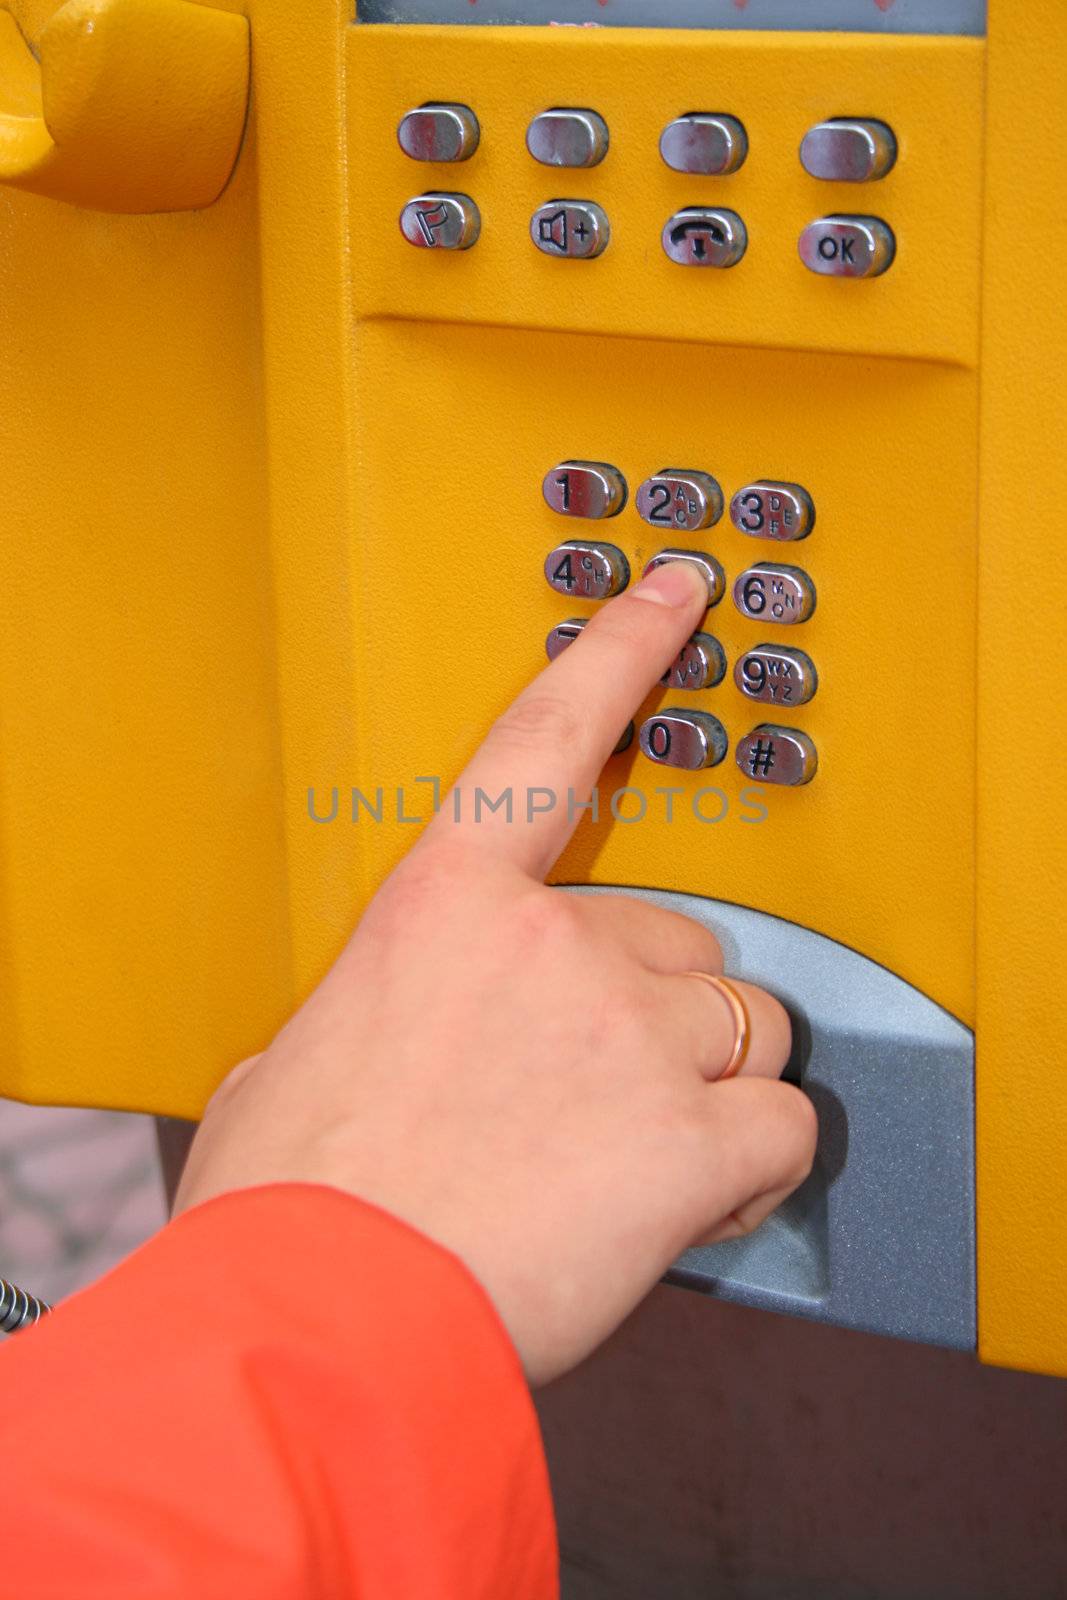 Woman's hand pressing the key on the public telephone's keyboard